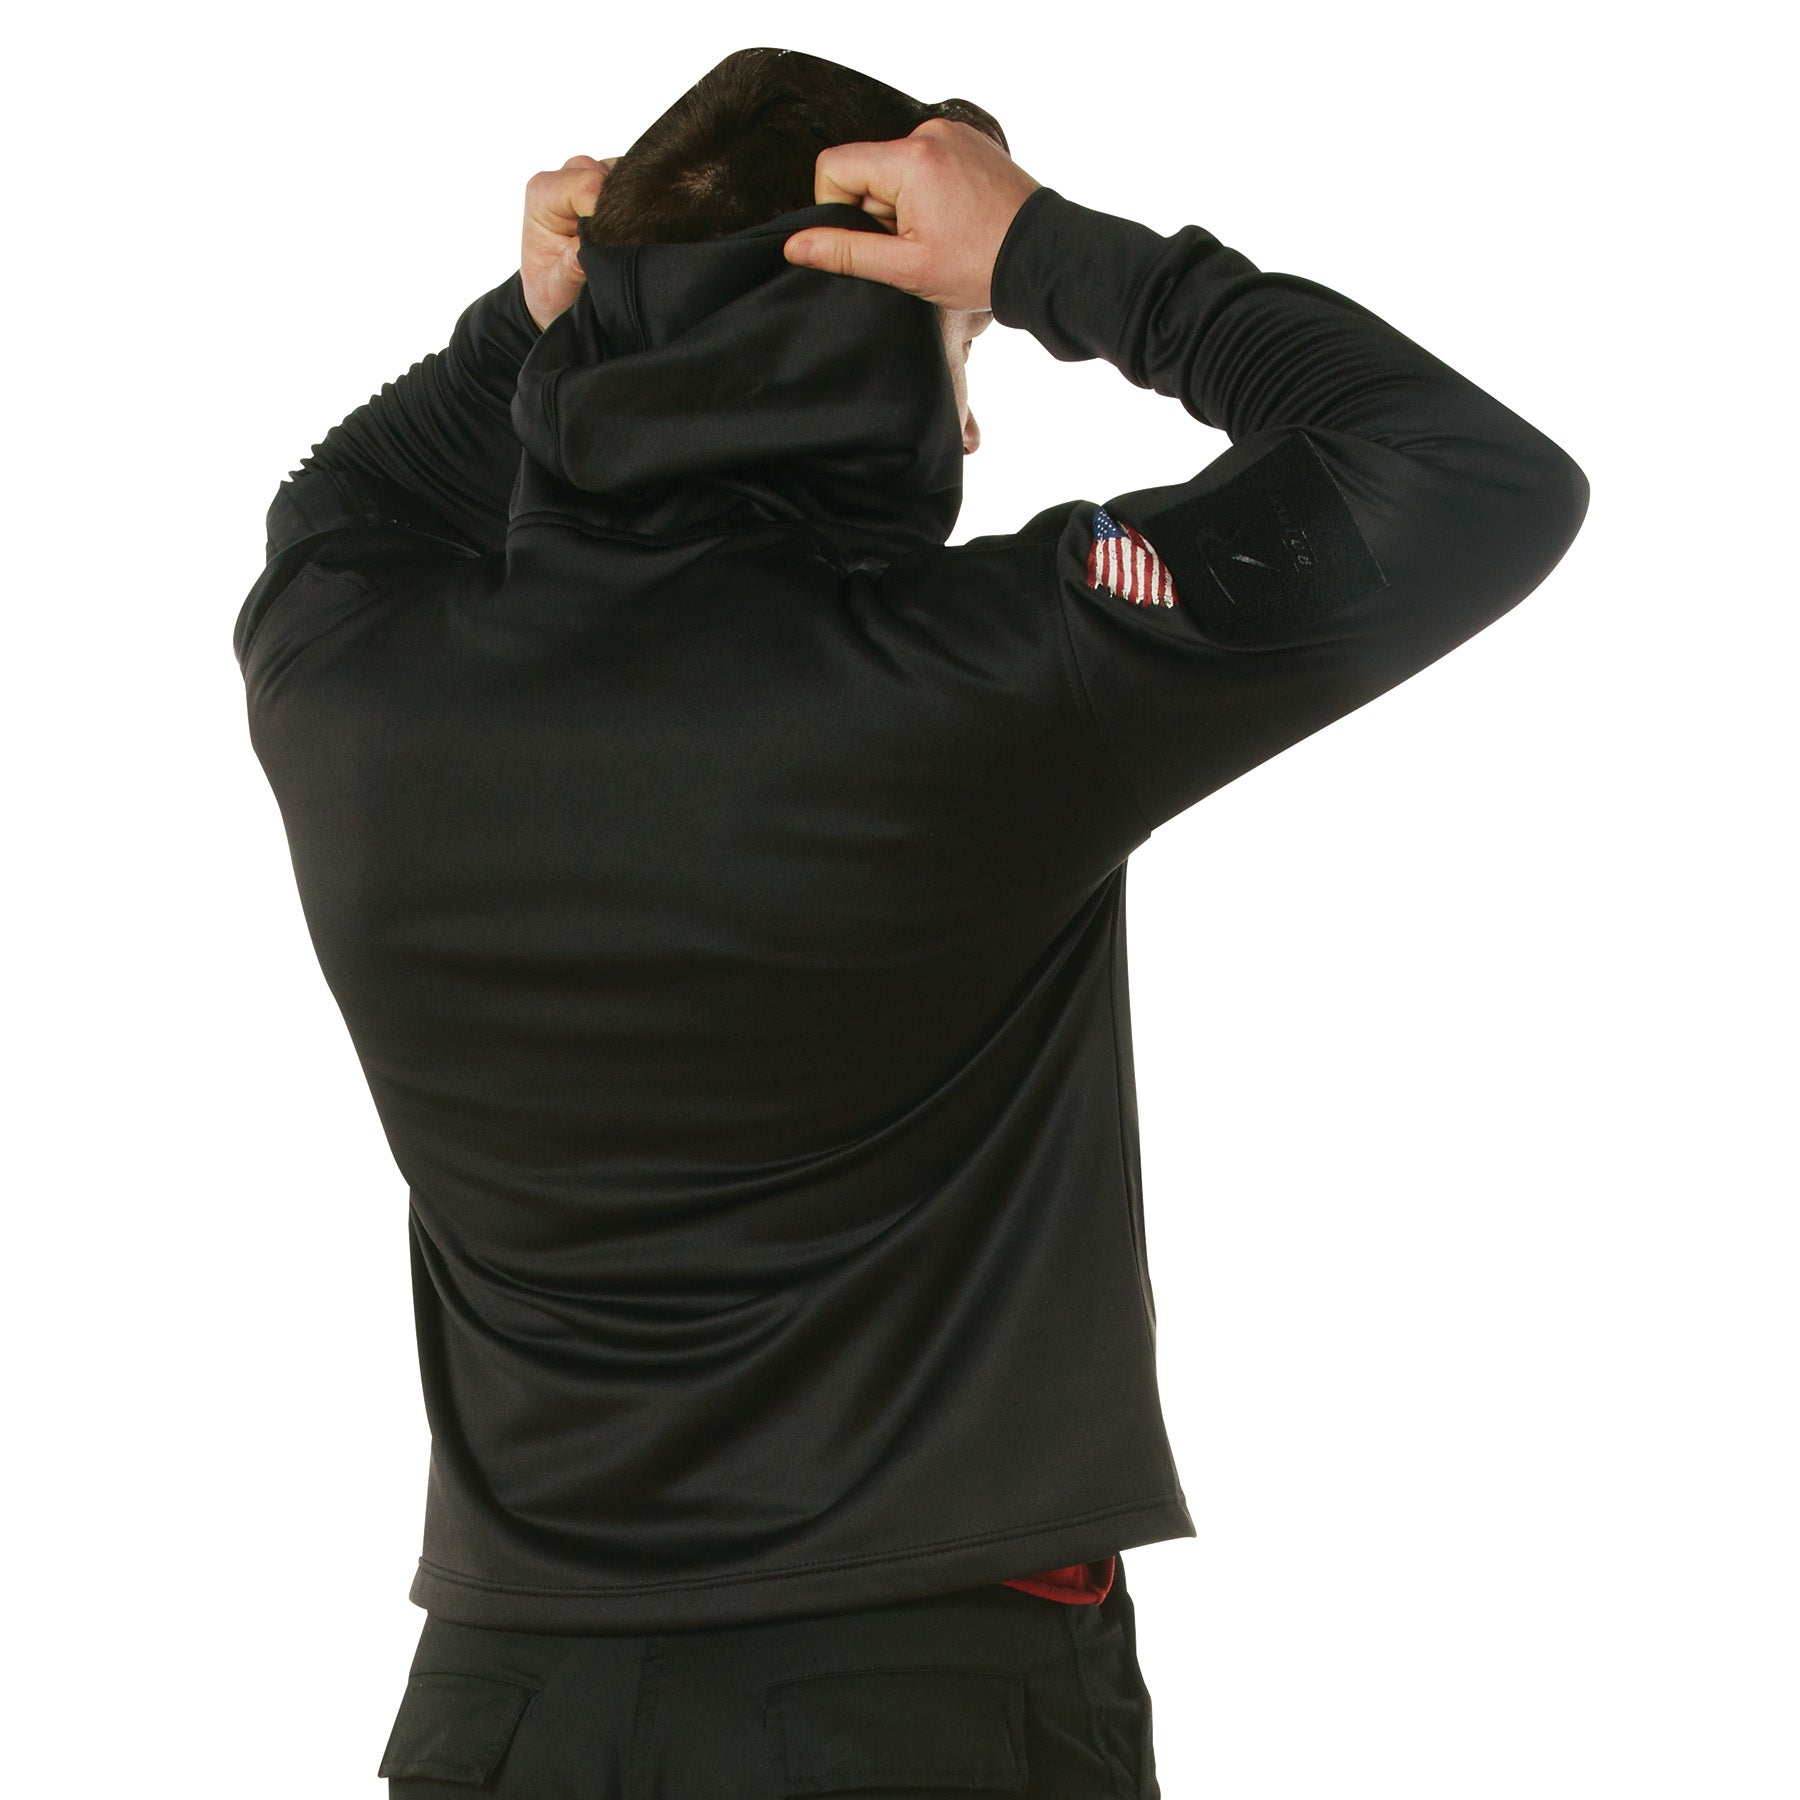 Poly US Flag / Bearded Skull Concealed Carry Hooded Sweatshirts